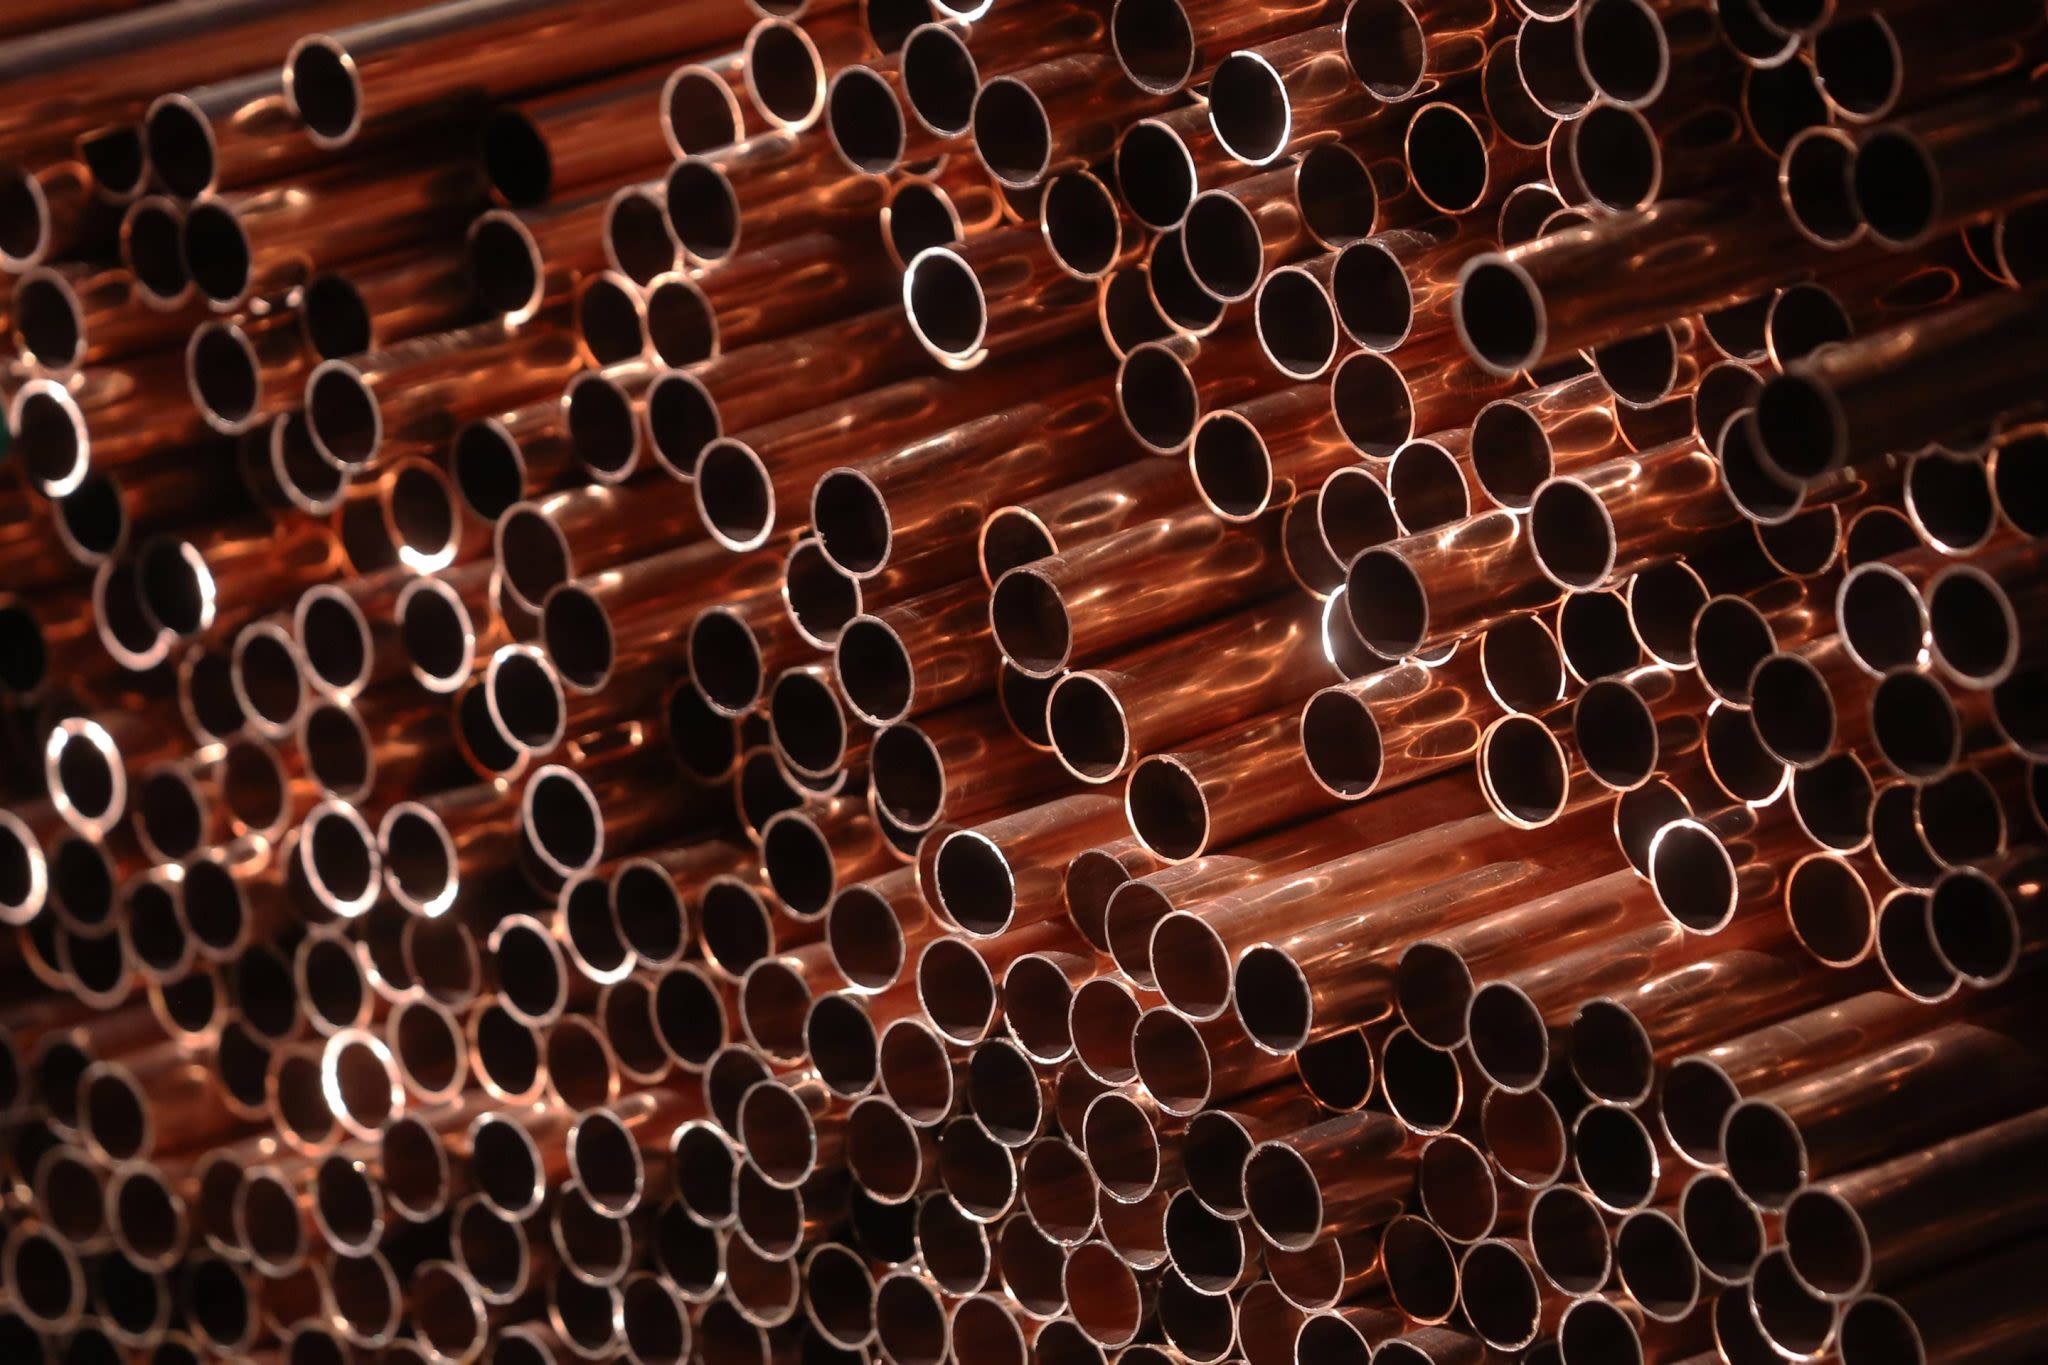 ‘Copper is the new oil,’ and prices could soar 50% as AI, green energy, and military spending boost demand, top commodities analyst says